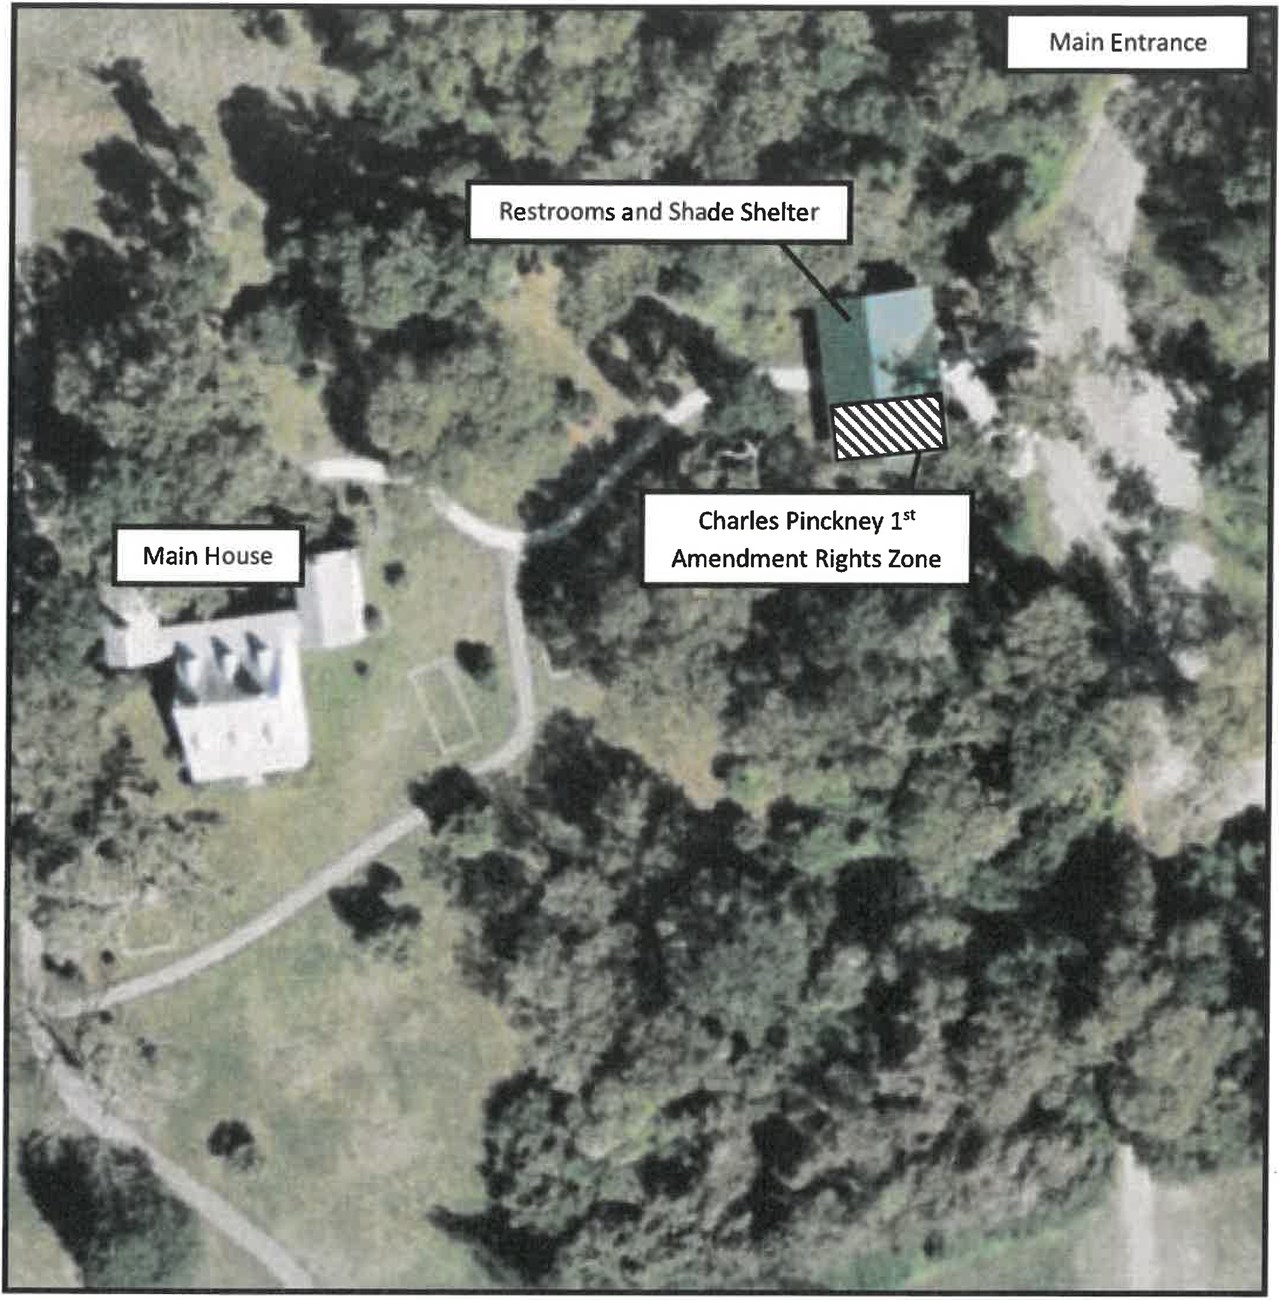 Aerial Map showing of Charles Pinckney NHS First Amendment Rights area which is near the restrooms and shade shelter